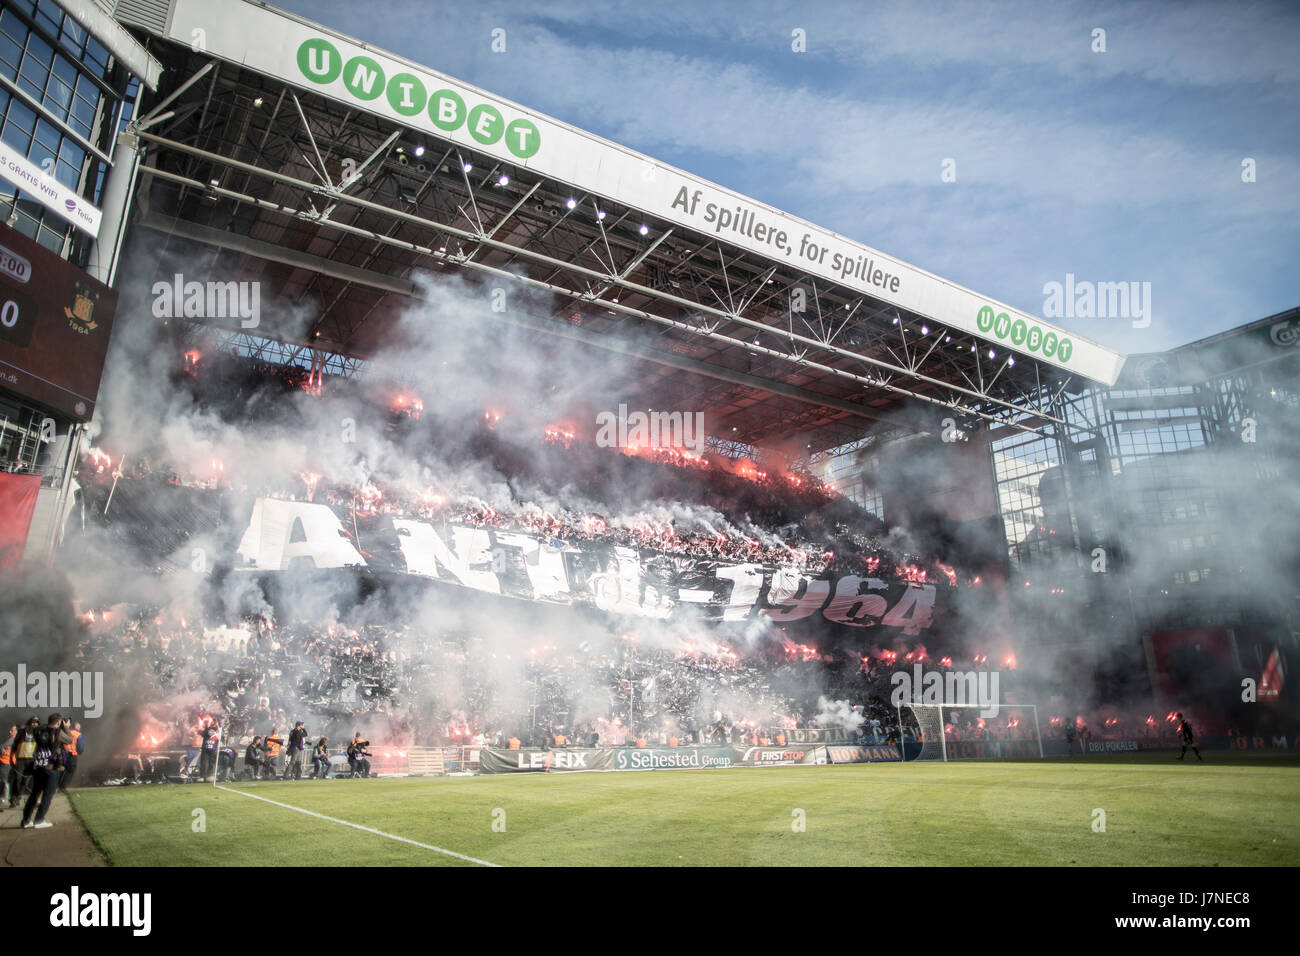 Denmark, Copenhagen, May 25th 2017. FC Copenhagen complete Danish double with cup 3-1 win over Brondby IF. The fans of FC Copenhagen welcomed the players with a giant tifo. Credit: Gonzales Photo/Alamy Live News Stock Photo